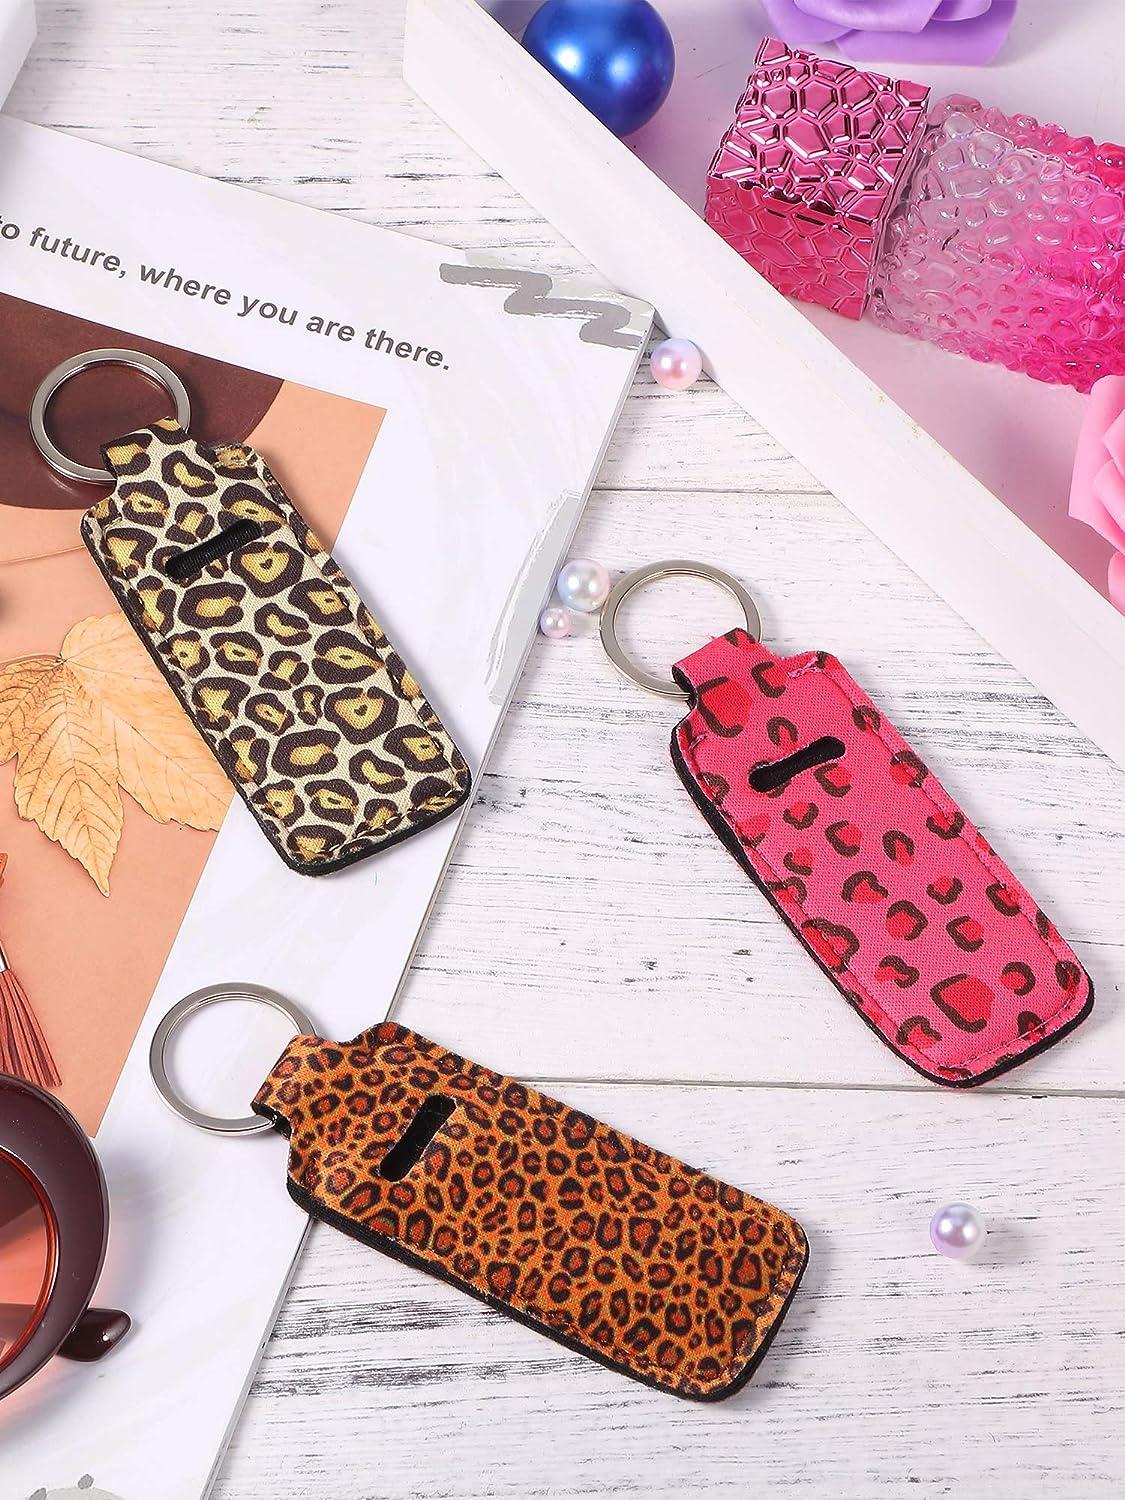 10 Pieces Cow Print Lipstick Holder Lipstick Holder Keychain Sleeve Lipstick  Pouch Lip Balm Holder Sleeve with 10 Metal Key Chains to hold Travel Daily  Accessories Leopard Style